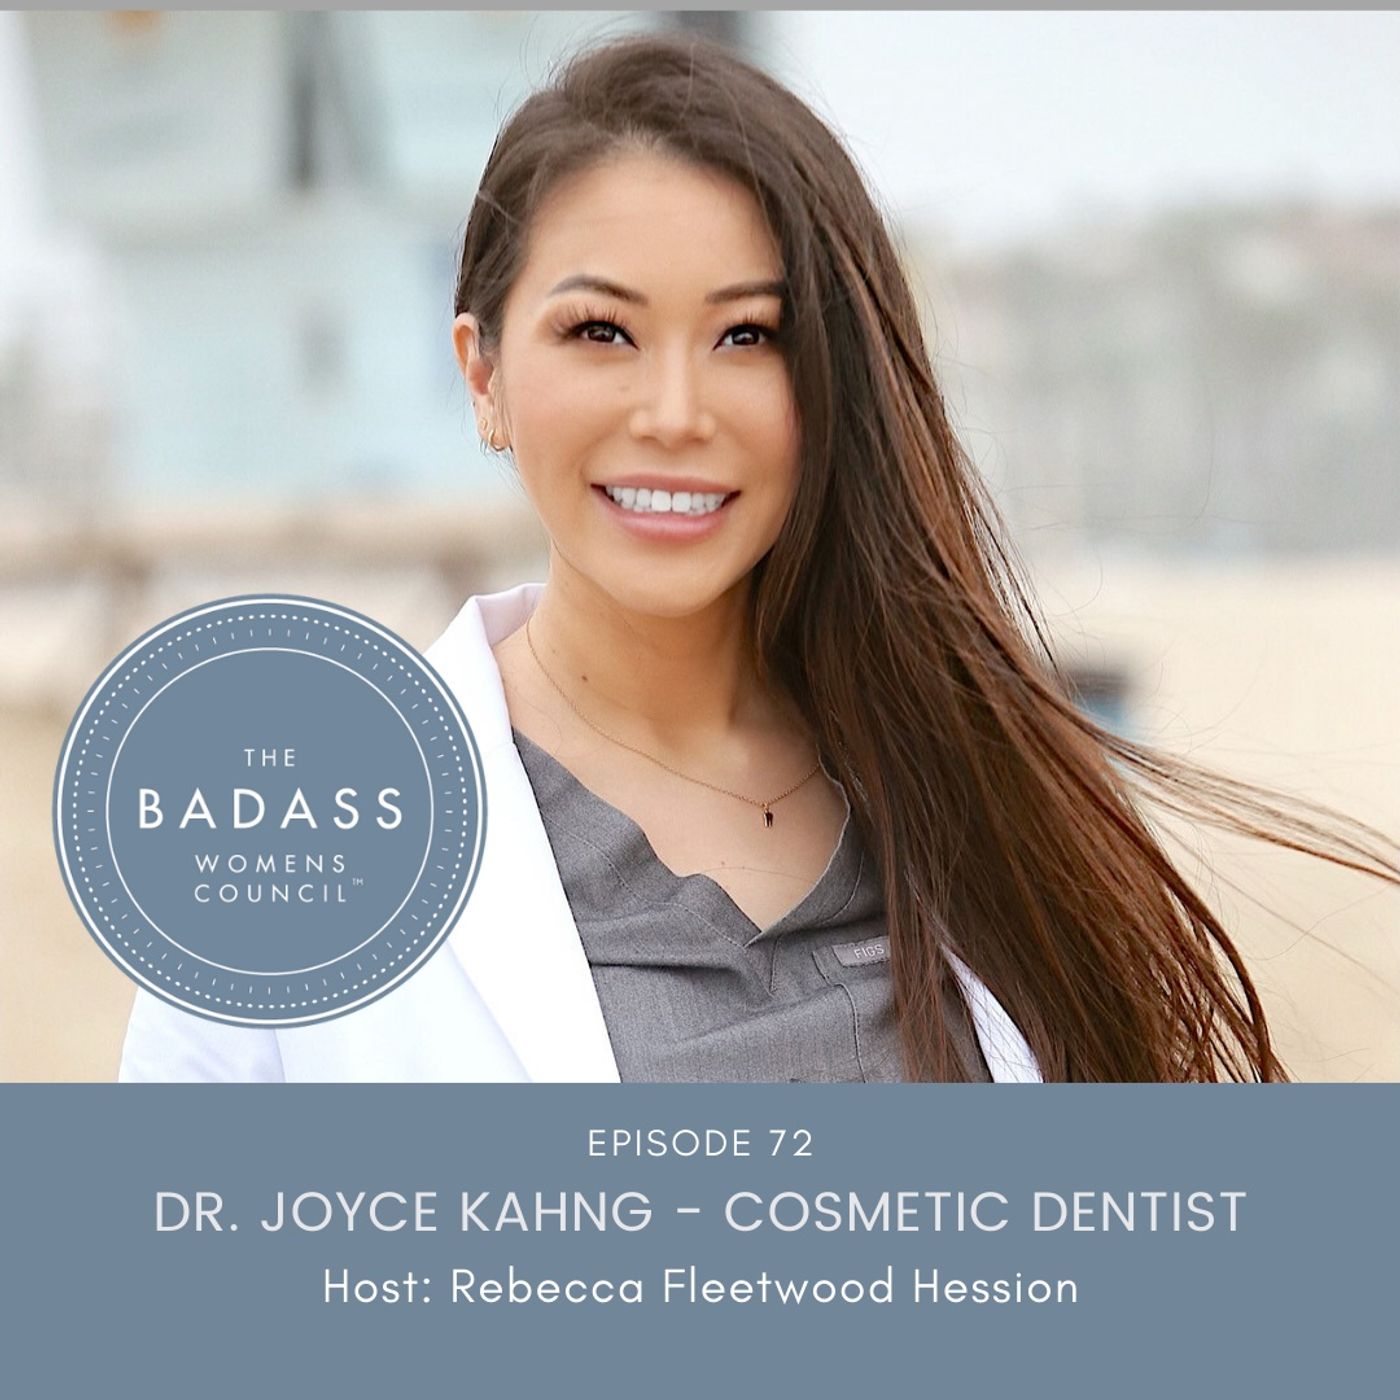 How to Find Your Personal Identity in Your Career with Dr. Joyce Kahng